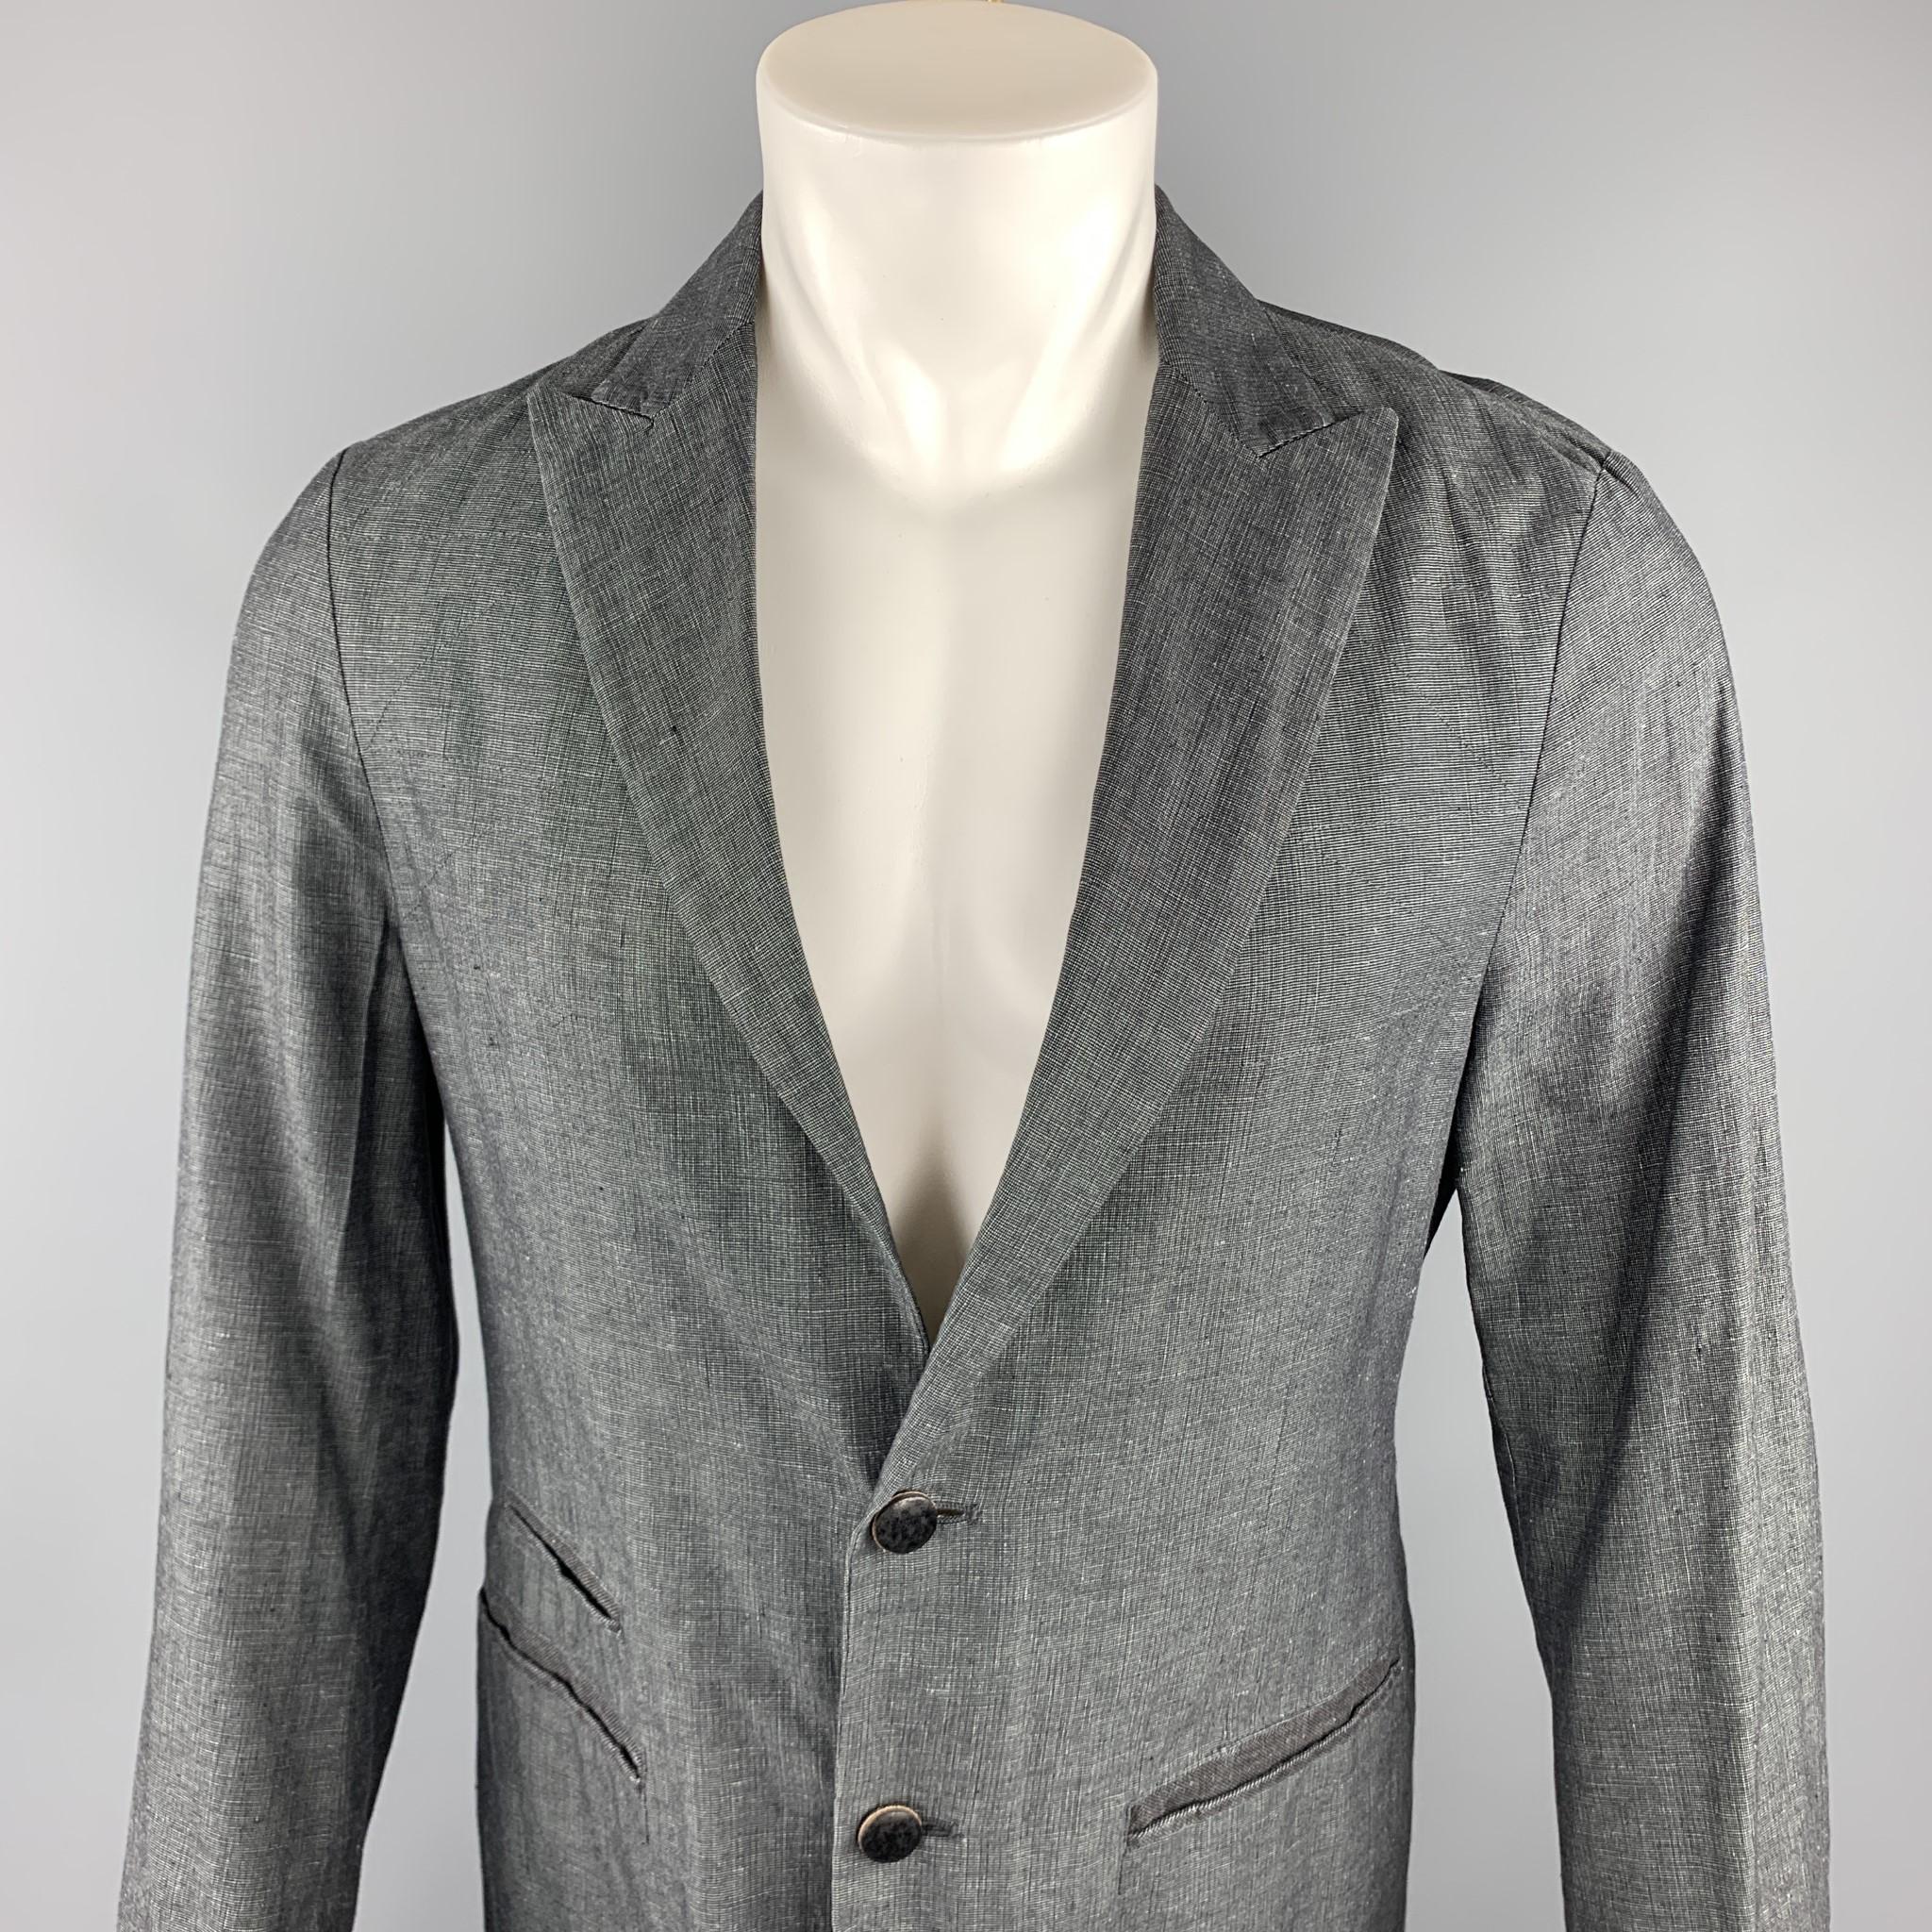 JOHN VARVATOS sport coat comes in a dark gray heather linen / cotton featuring a peak lapel style, stitching details, slit pockets, and and a two button closure. Made in Italy.

Excellent Pre-Owned Condition.
Marked: IT 46

Measurements:

Shoulder: